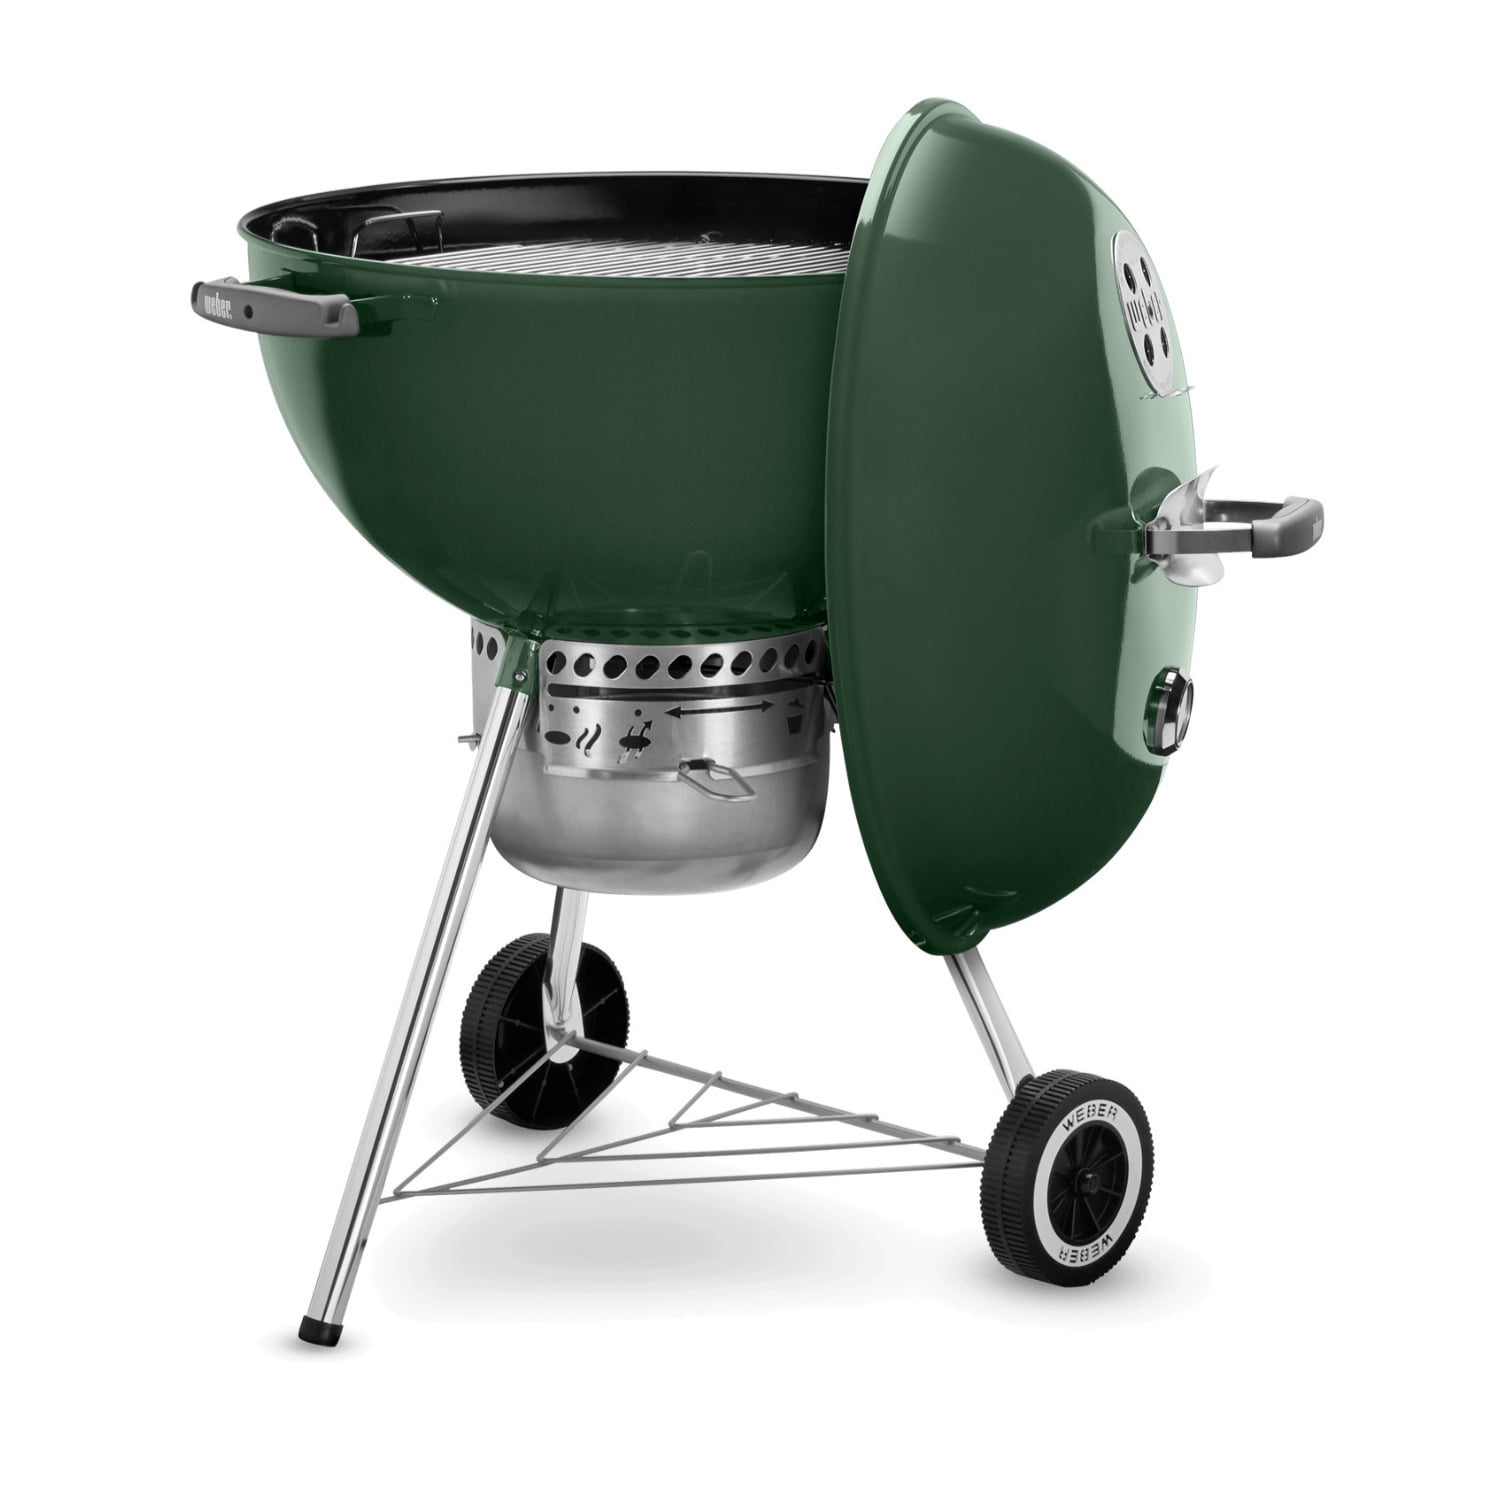 Looting Heading Driving force Weber Original Kettle Premium 22 In. Charcoal Grill - Walmart.com